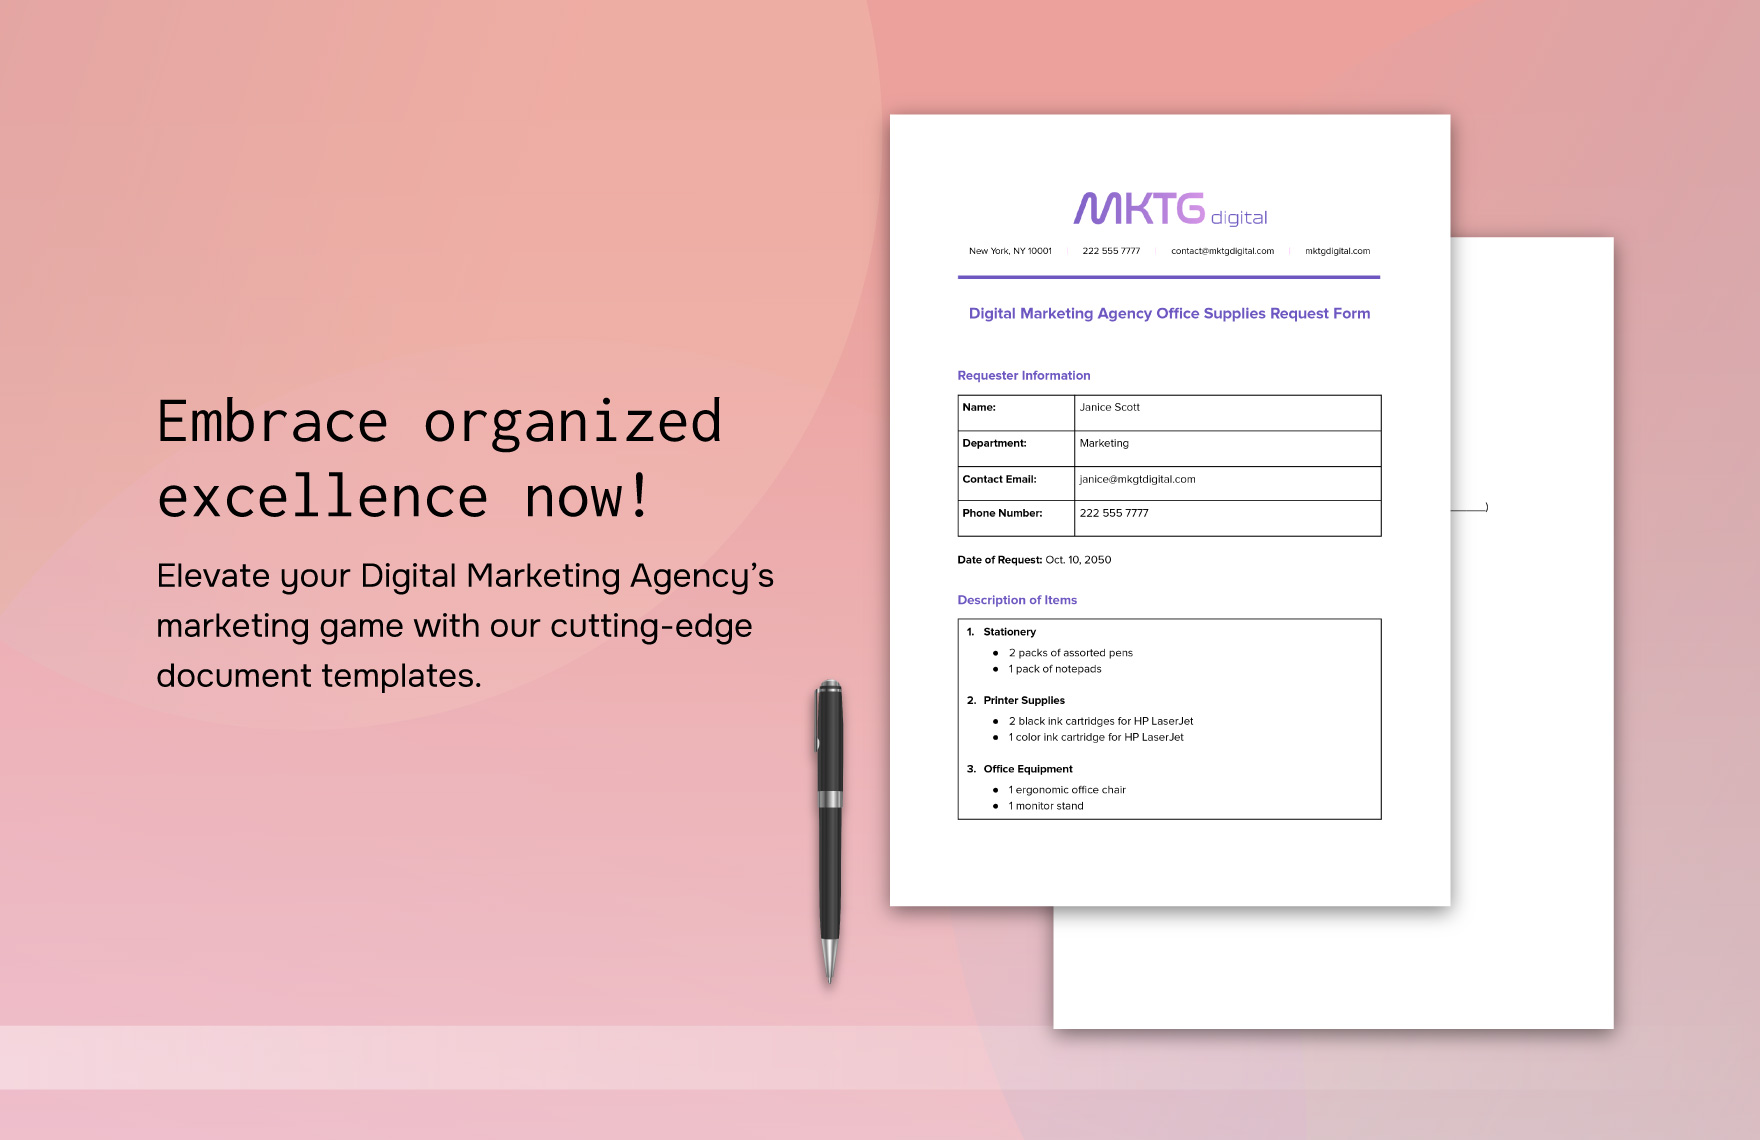 Digital Marketing Agency Office Supplies Request Form Template